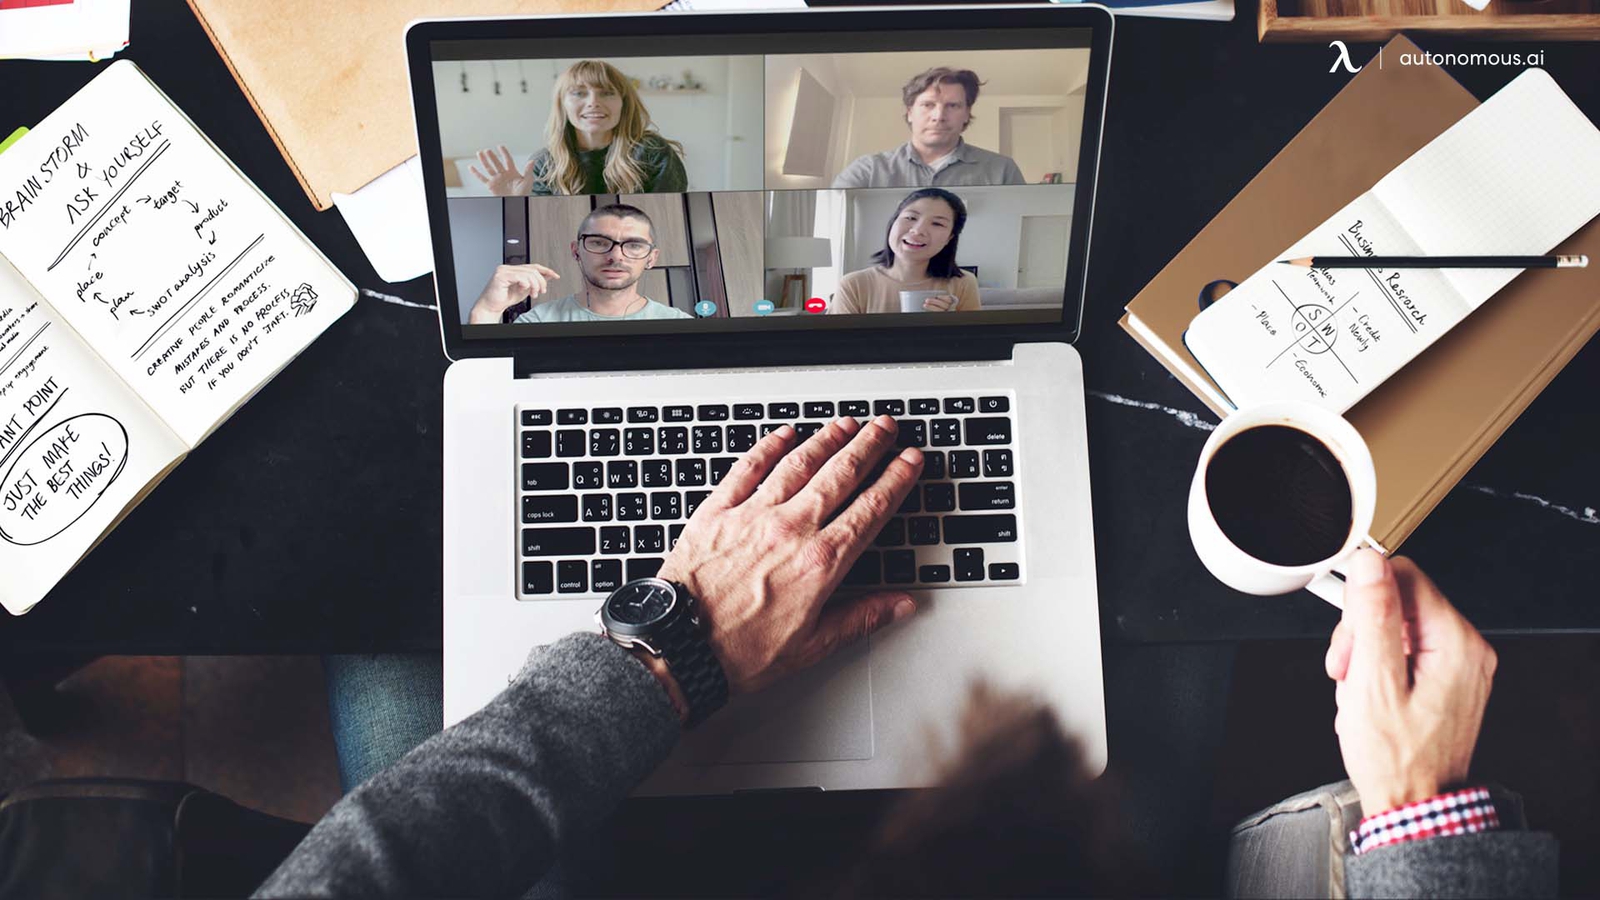 20 Best Online Meeting Tools & How to Pick One